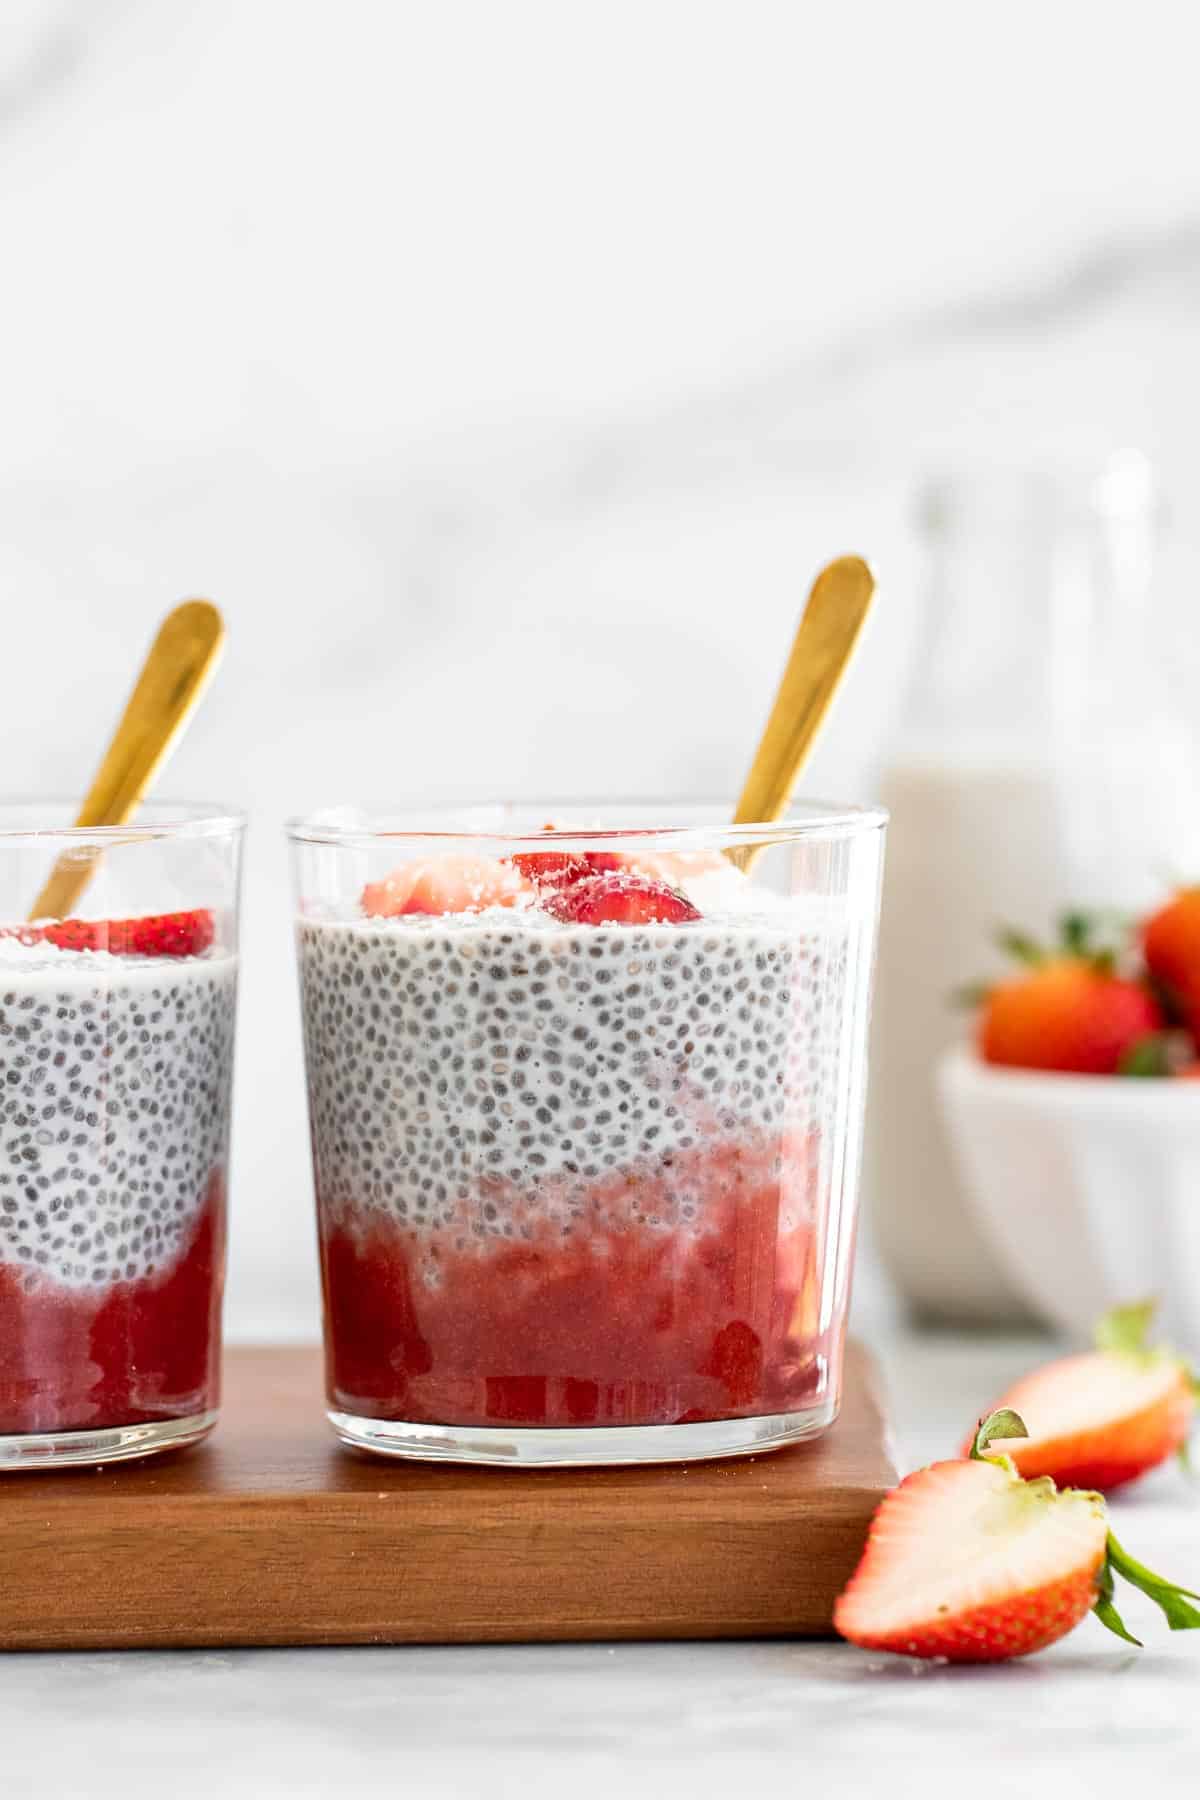 Two jars of the chia pudding on a wooden board.